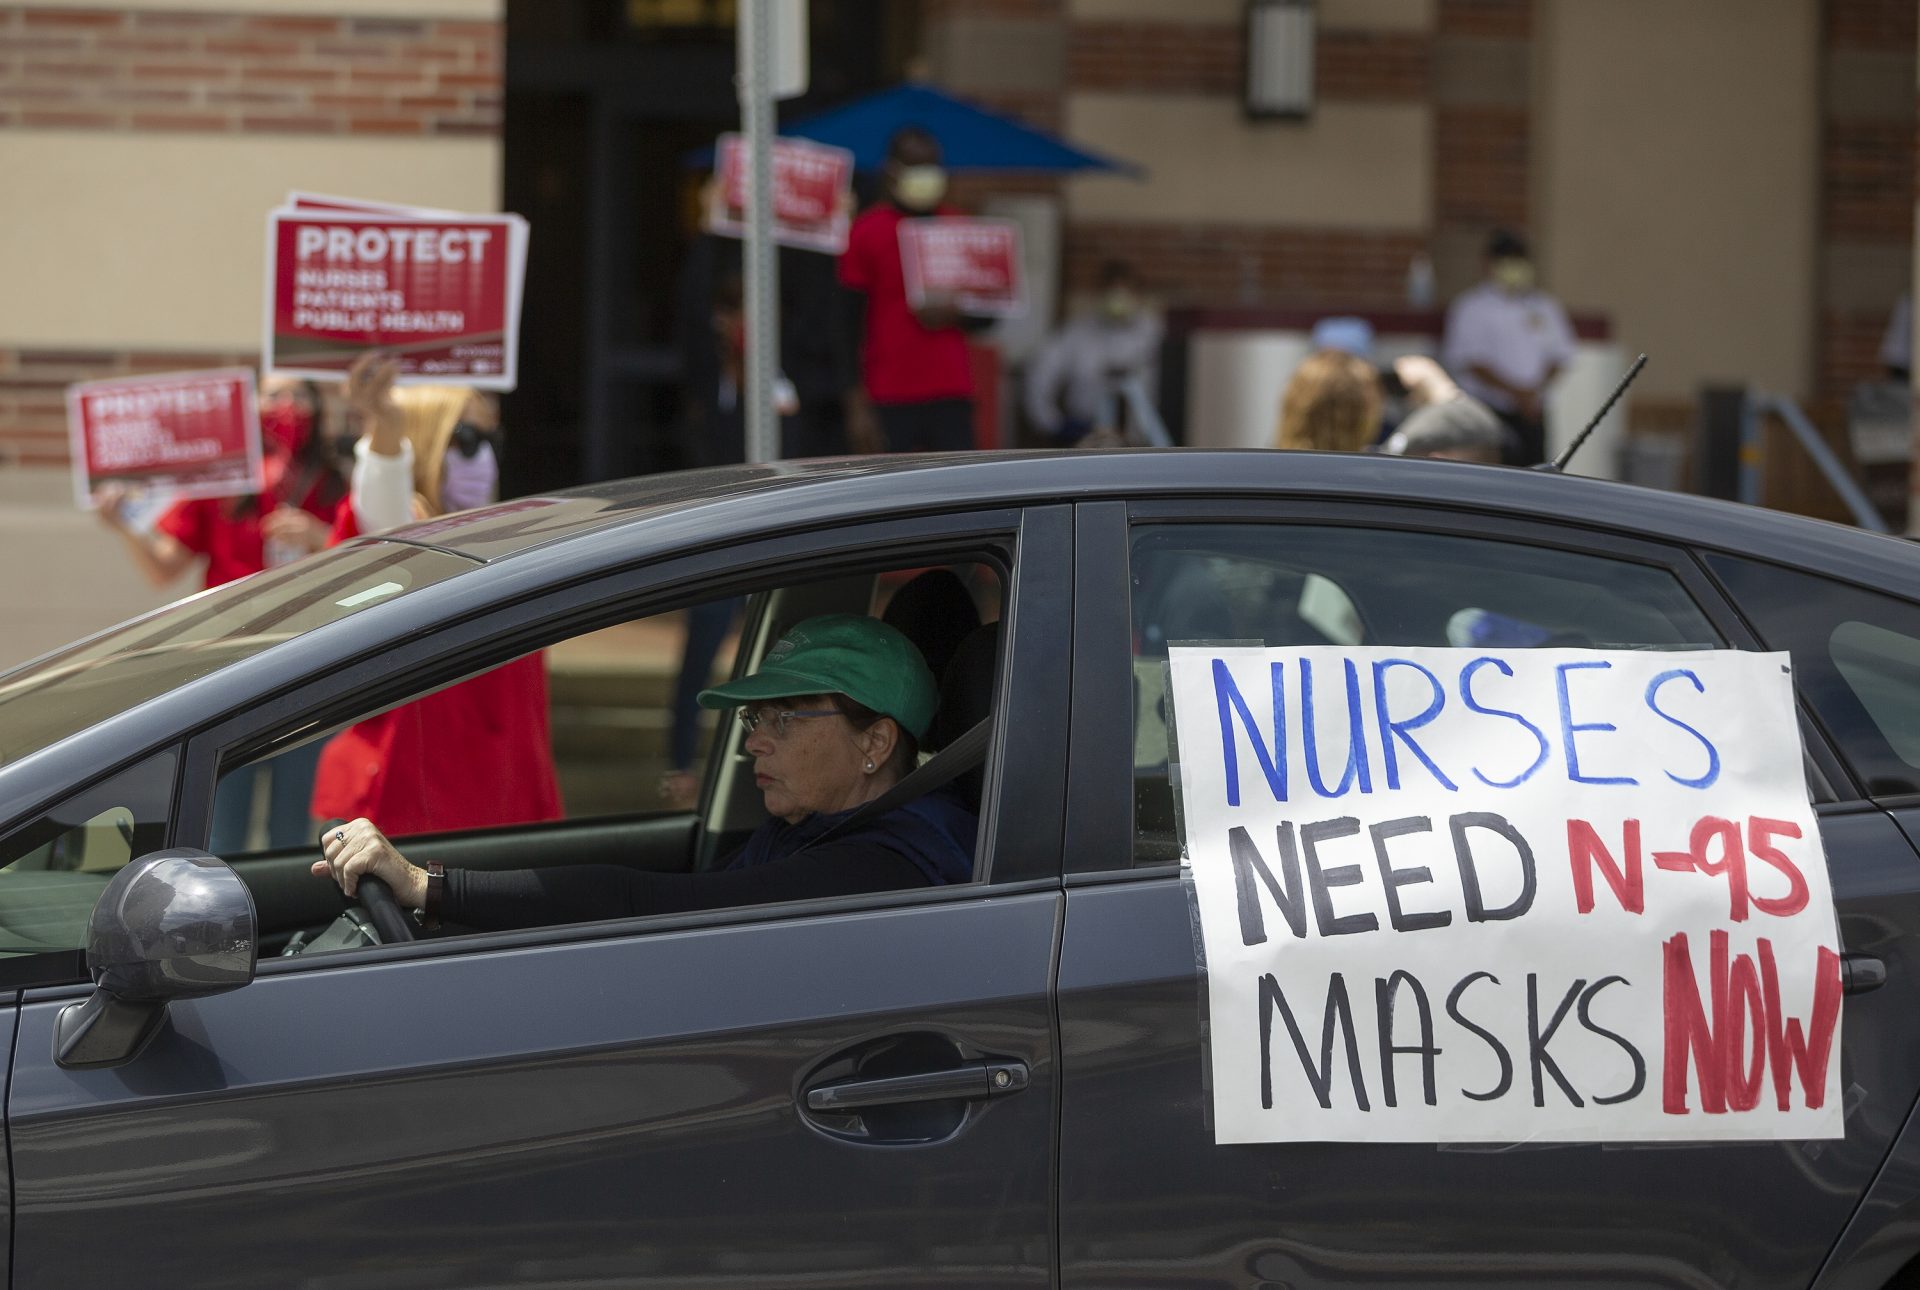 FILE - In this April 13, 2020, file photo, a car passes nurses protesting the lack of N95 respirators and other Personal Protective Equipment outside the UCLA Medical Center, Santa Monica amid the coronavirus pandemic in Santa Monica, Calif. An Associated Press review of more than 20 states found that before the coronavirus outbreak many had at least a modest supply of N95 masks, gowns, gloves and other medical equipment. But those were often well past their expiration dates â€” left over from the H1N1 influenza outbreak a decade ago.